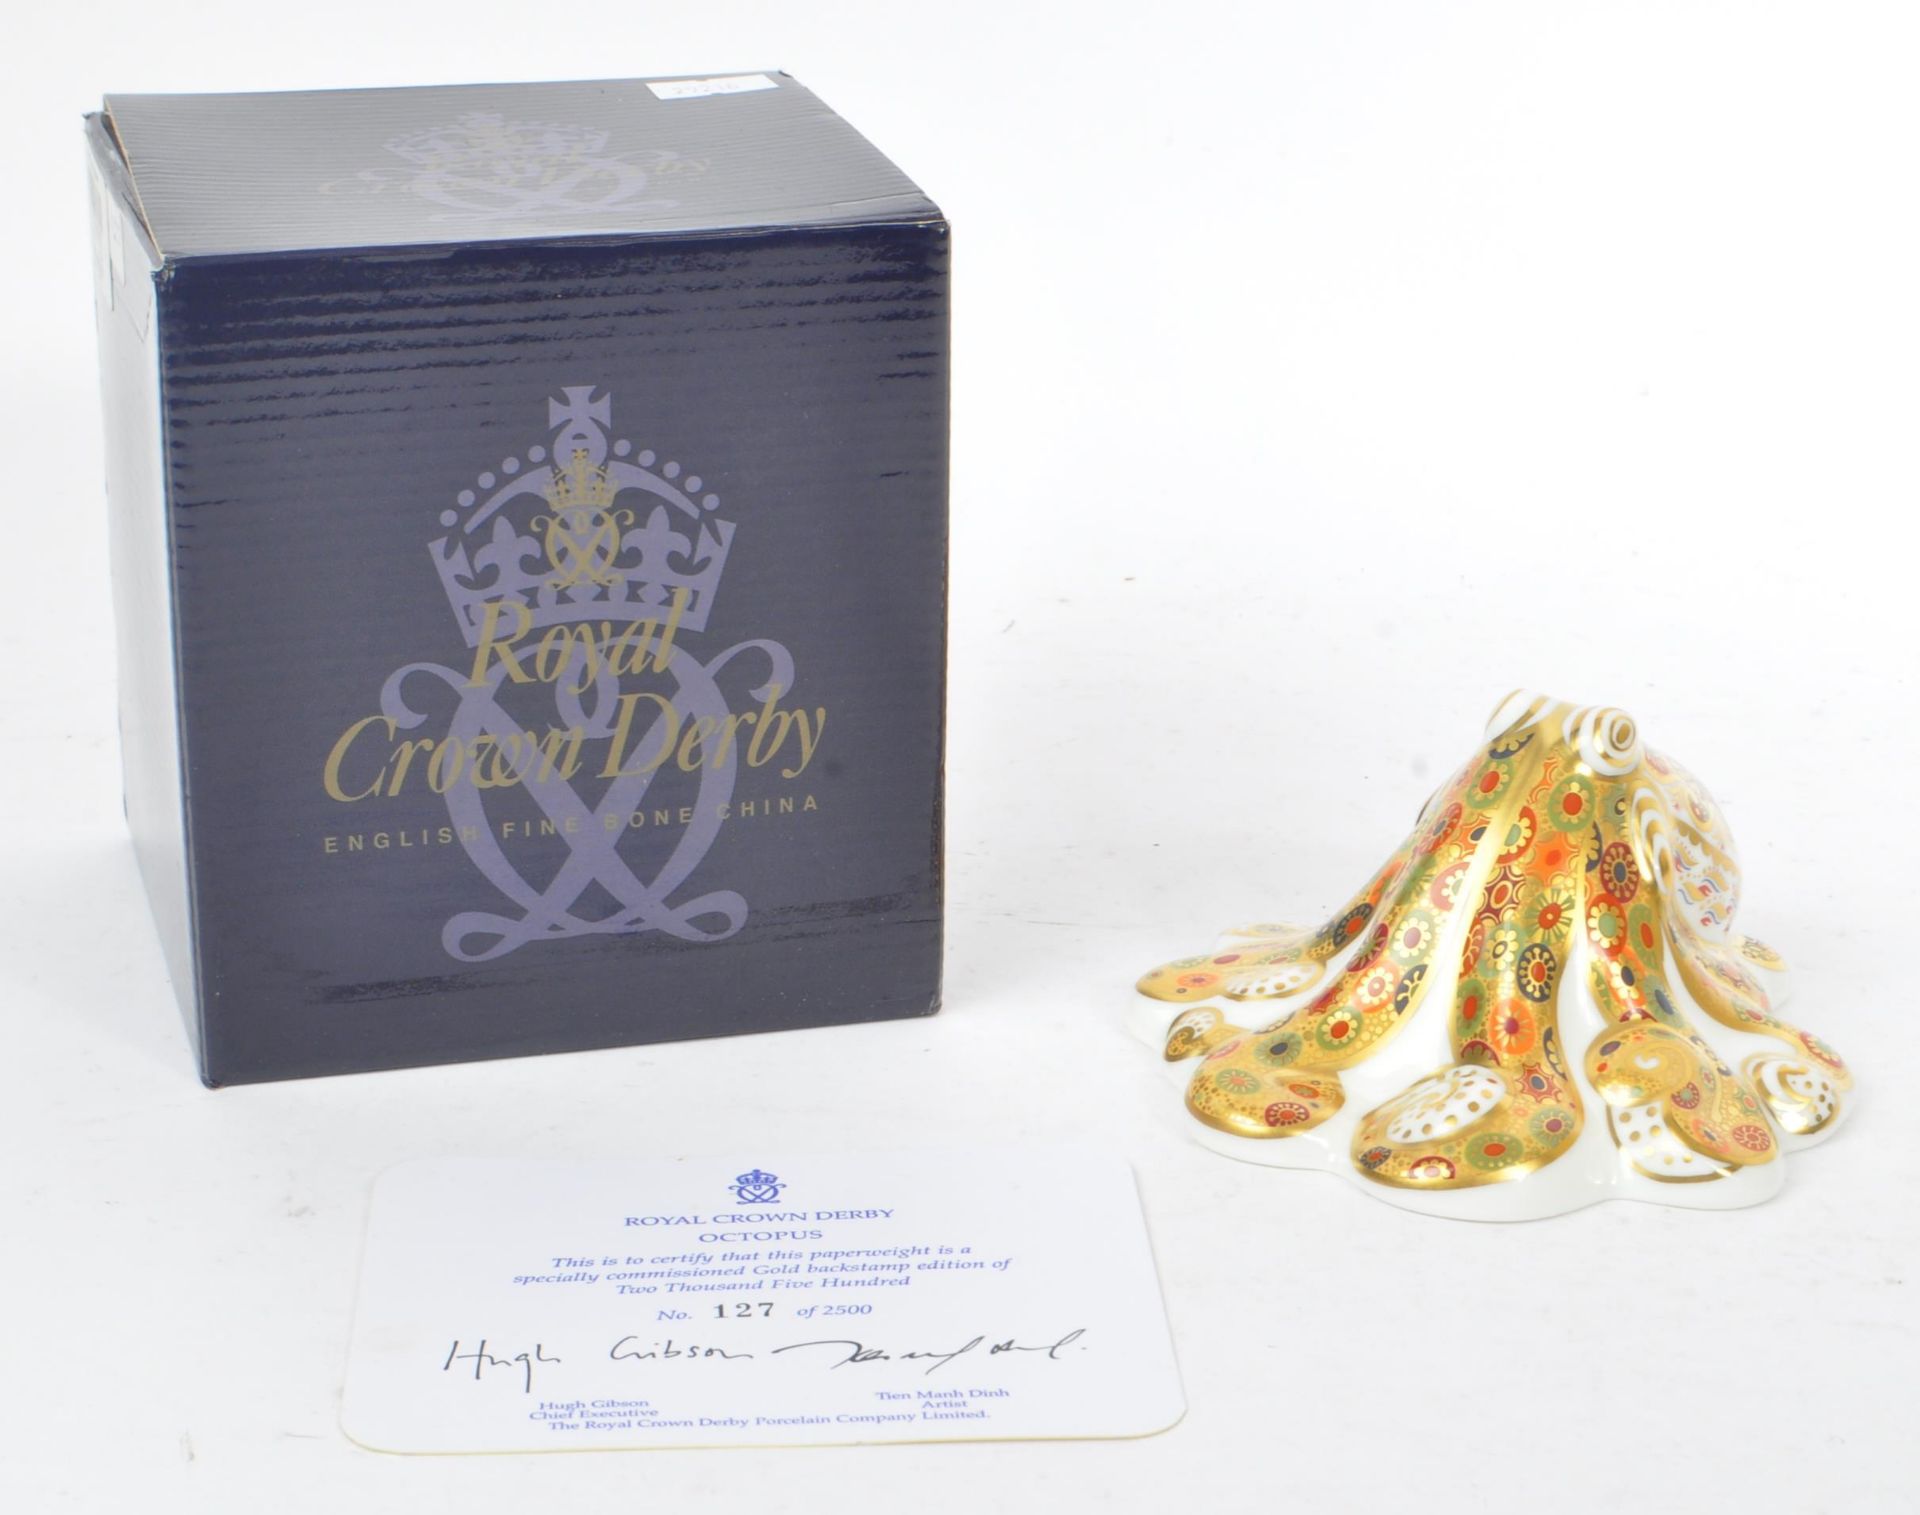 ROYAL CROWN DERBY - OCTOPUS GOLD SIGNATURE PAPERWEIGHT